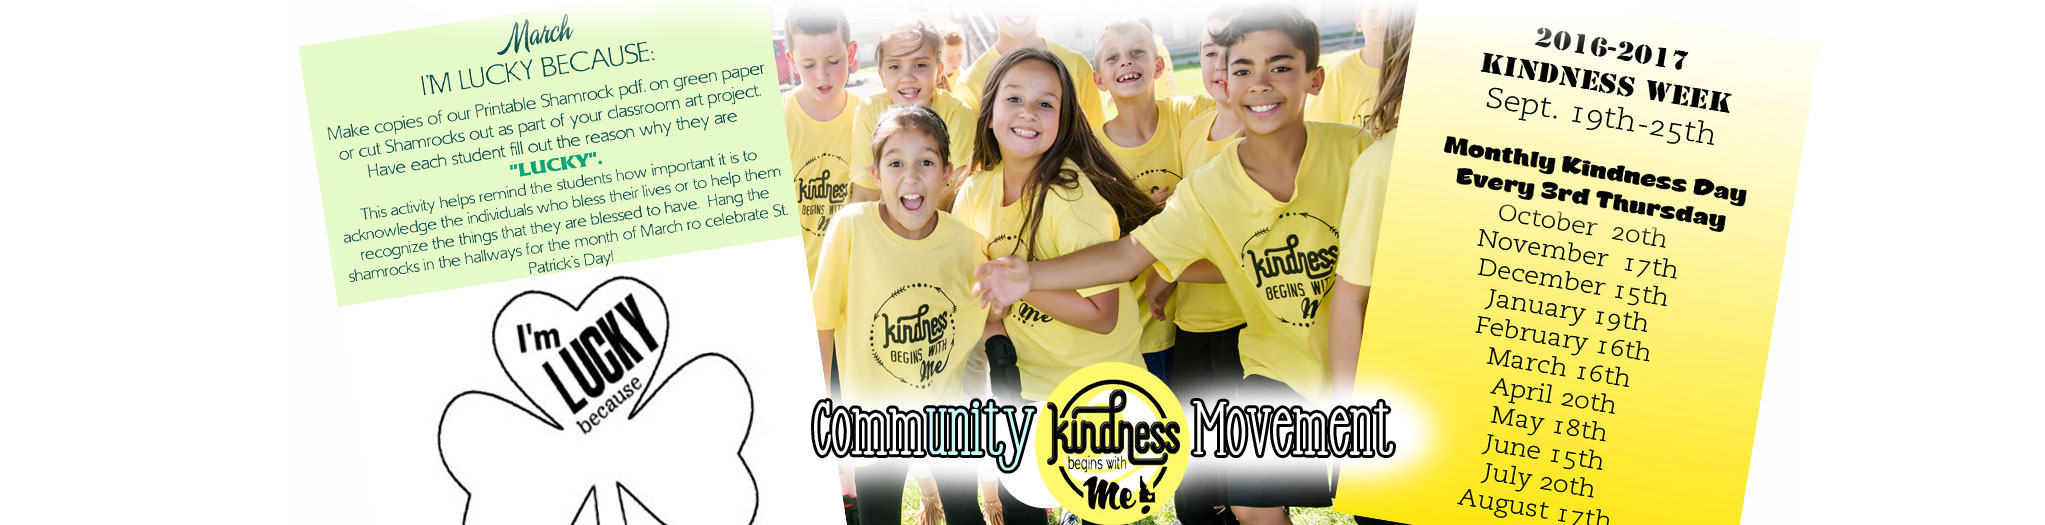 March Kindness Day – Thursday, March 16th, 2017